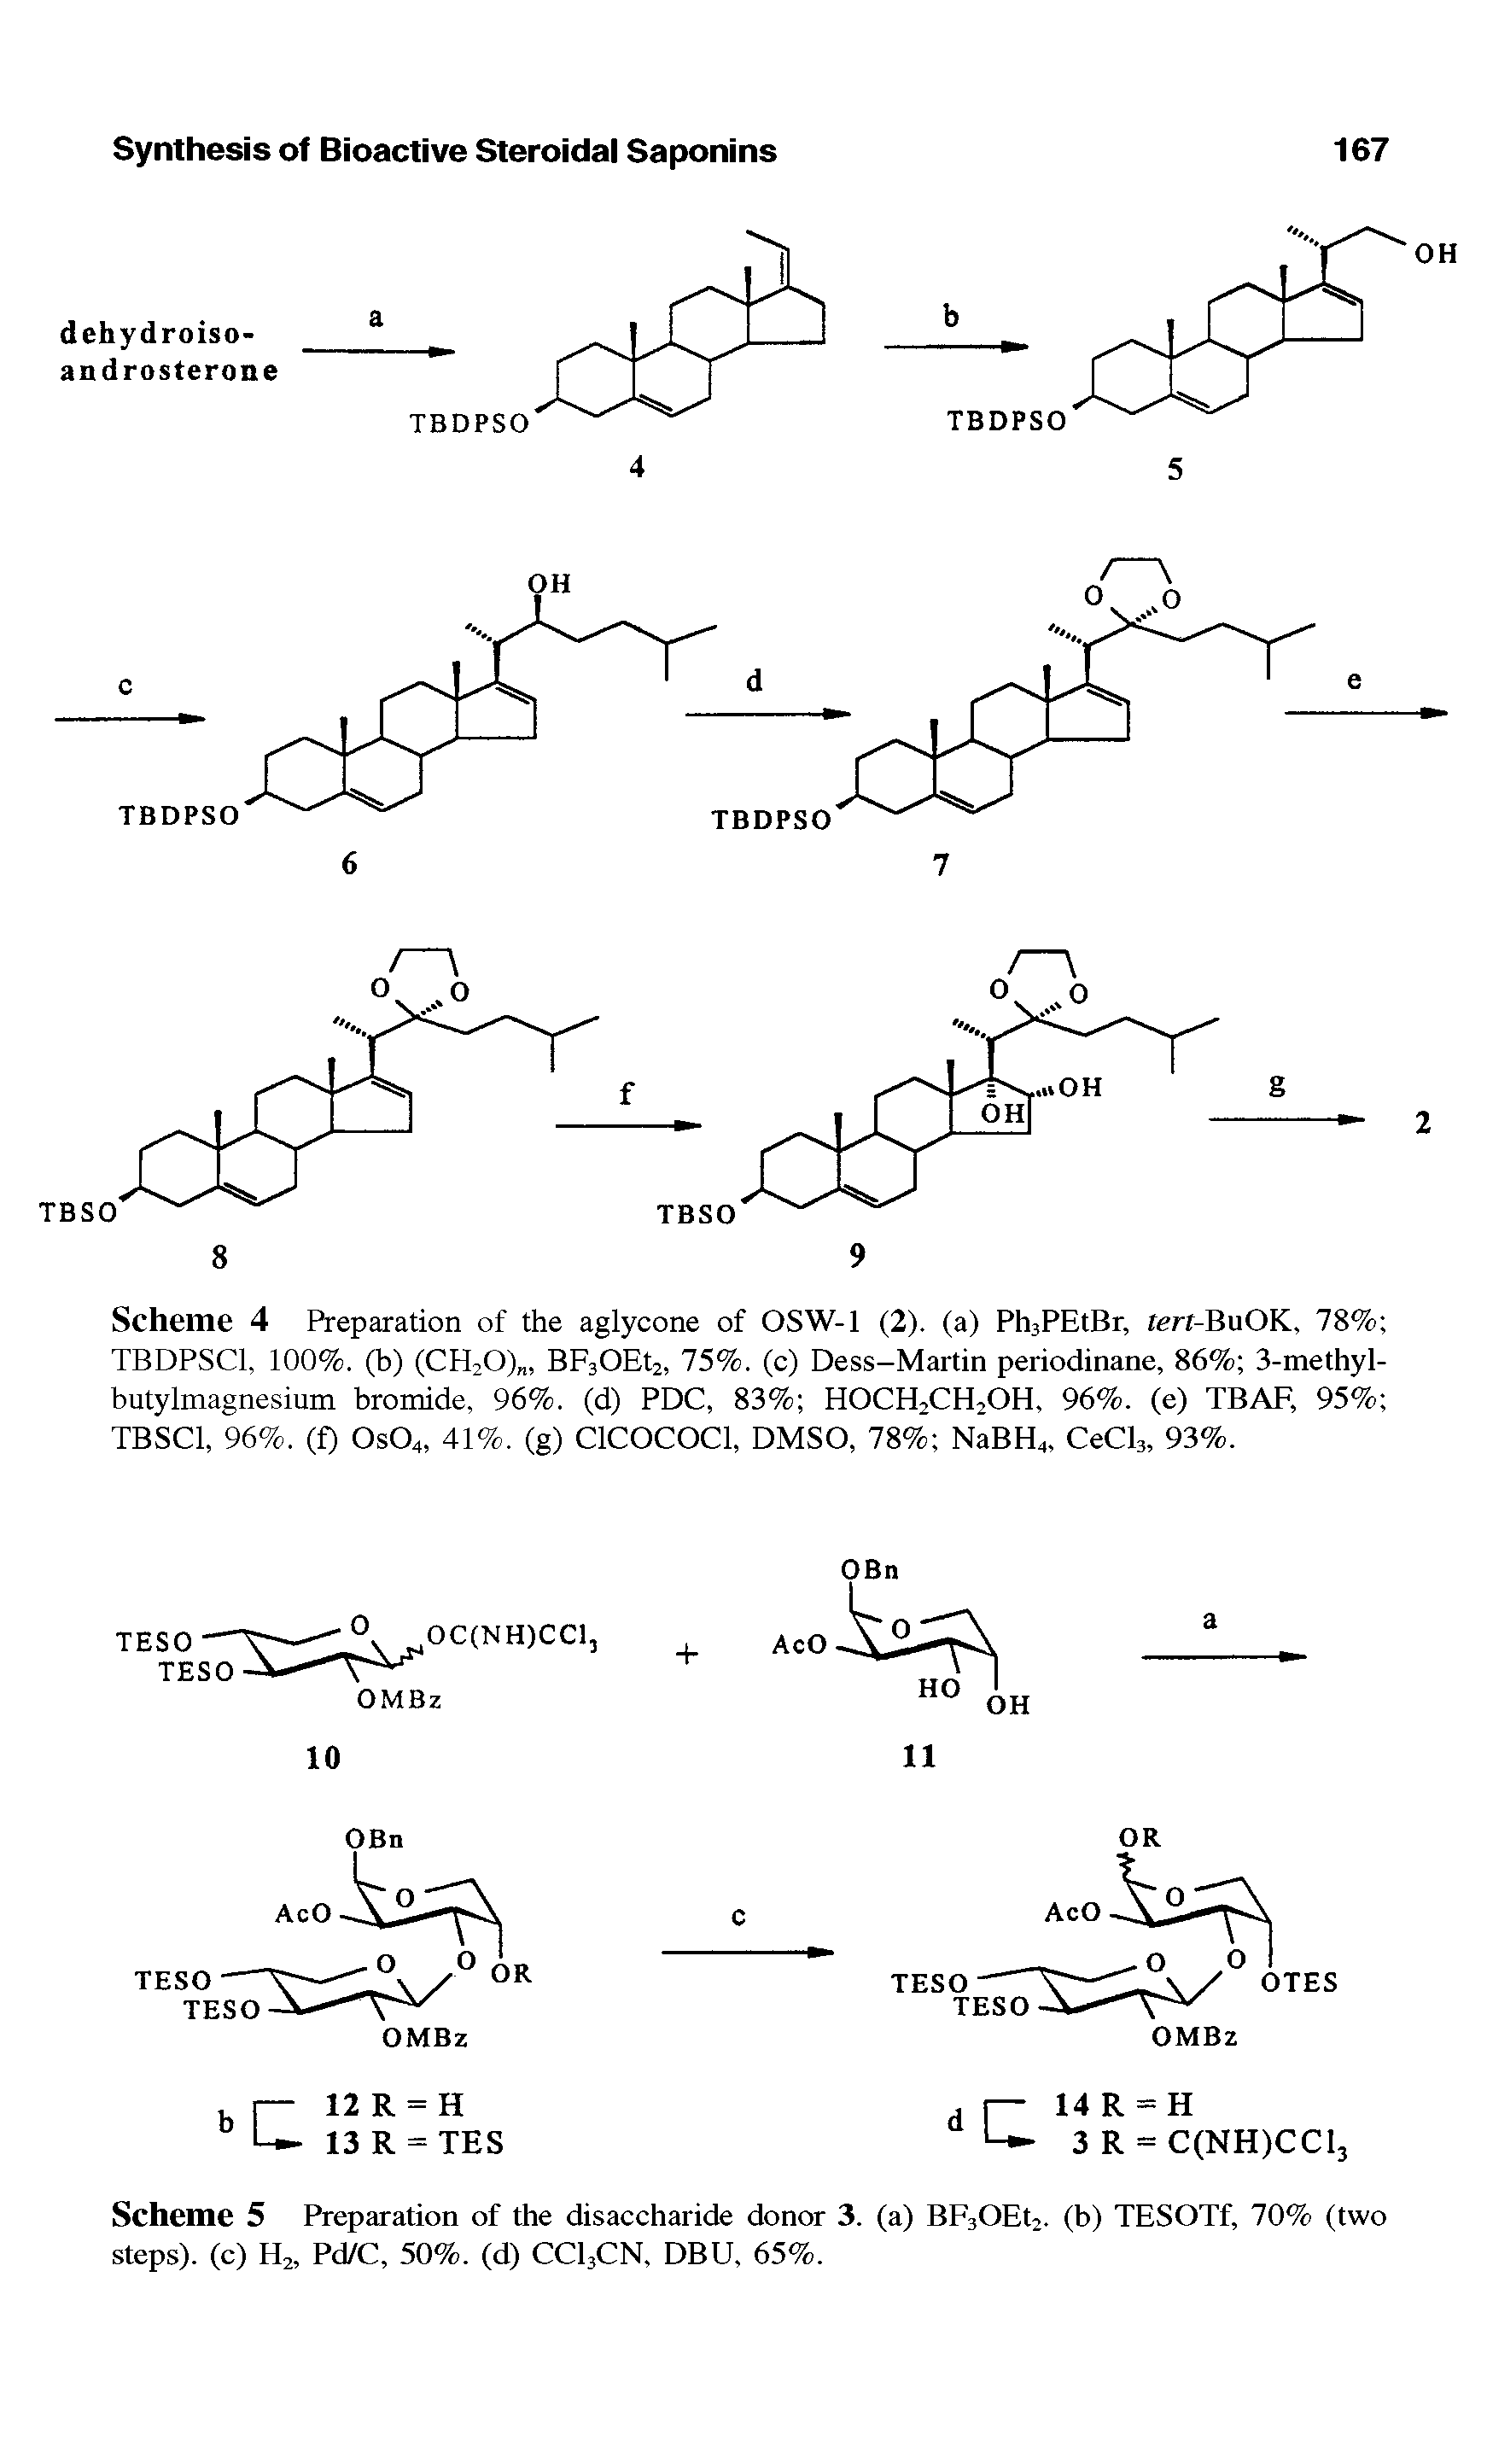 Scheme 4 Preparation of the aglycone of OSW-1 (2). (a) PhsPEtBr, rm-BuOK, 78% TBDPSCl, 100%. (b) (CH2OX, Bp30Et2, 75%. (c) Dess-Martin periodinane, 86% 3-methyl-butylmagnesium bromide, 96%. (d) PDC, 83% HOCHjCHjOH, 96%. (e) TBAF, 95% TBSCl, 96%. (f) OSO4, 41%. (g) ClCOCOCl, DMSO, 78% NaBH CeCE, 93%.